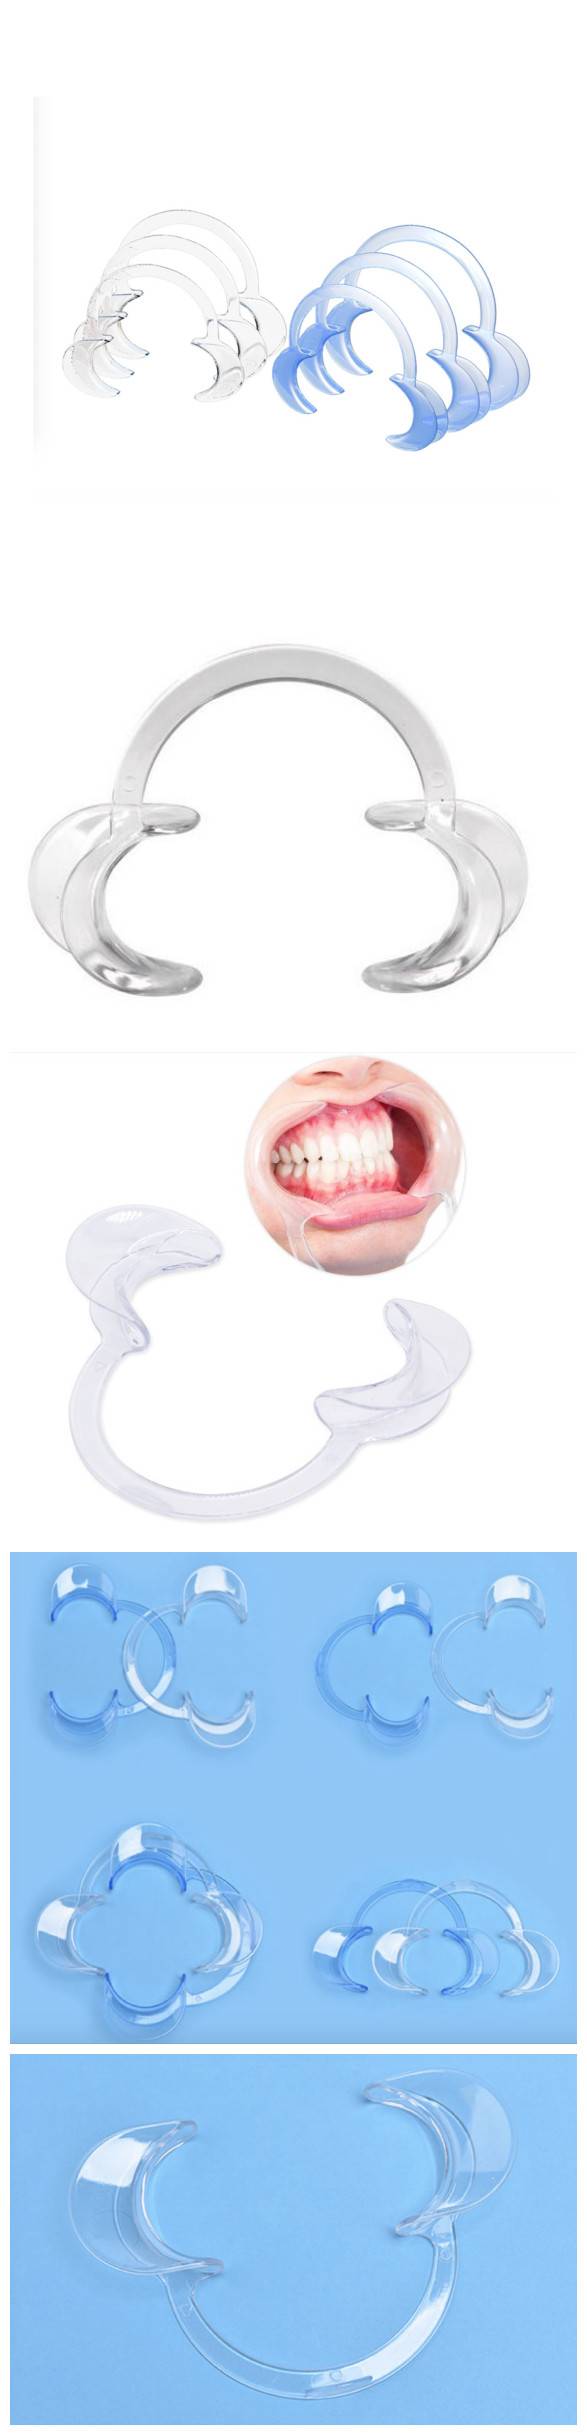 teeth-whitening-mouth-retractors